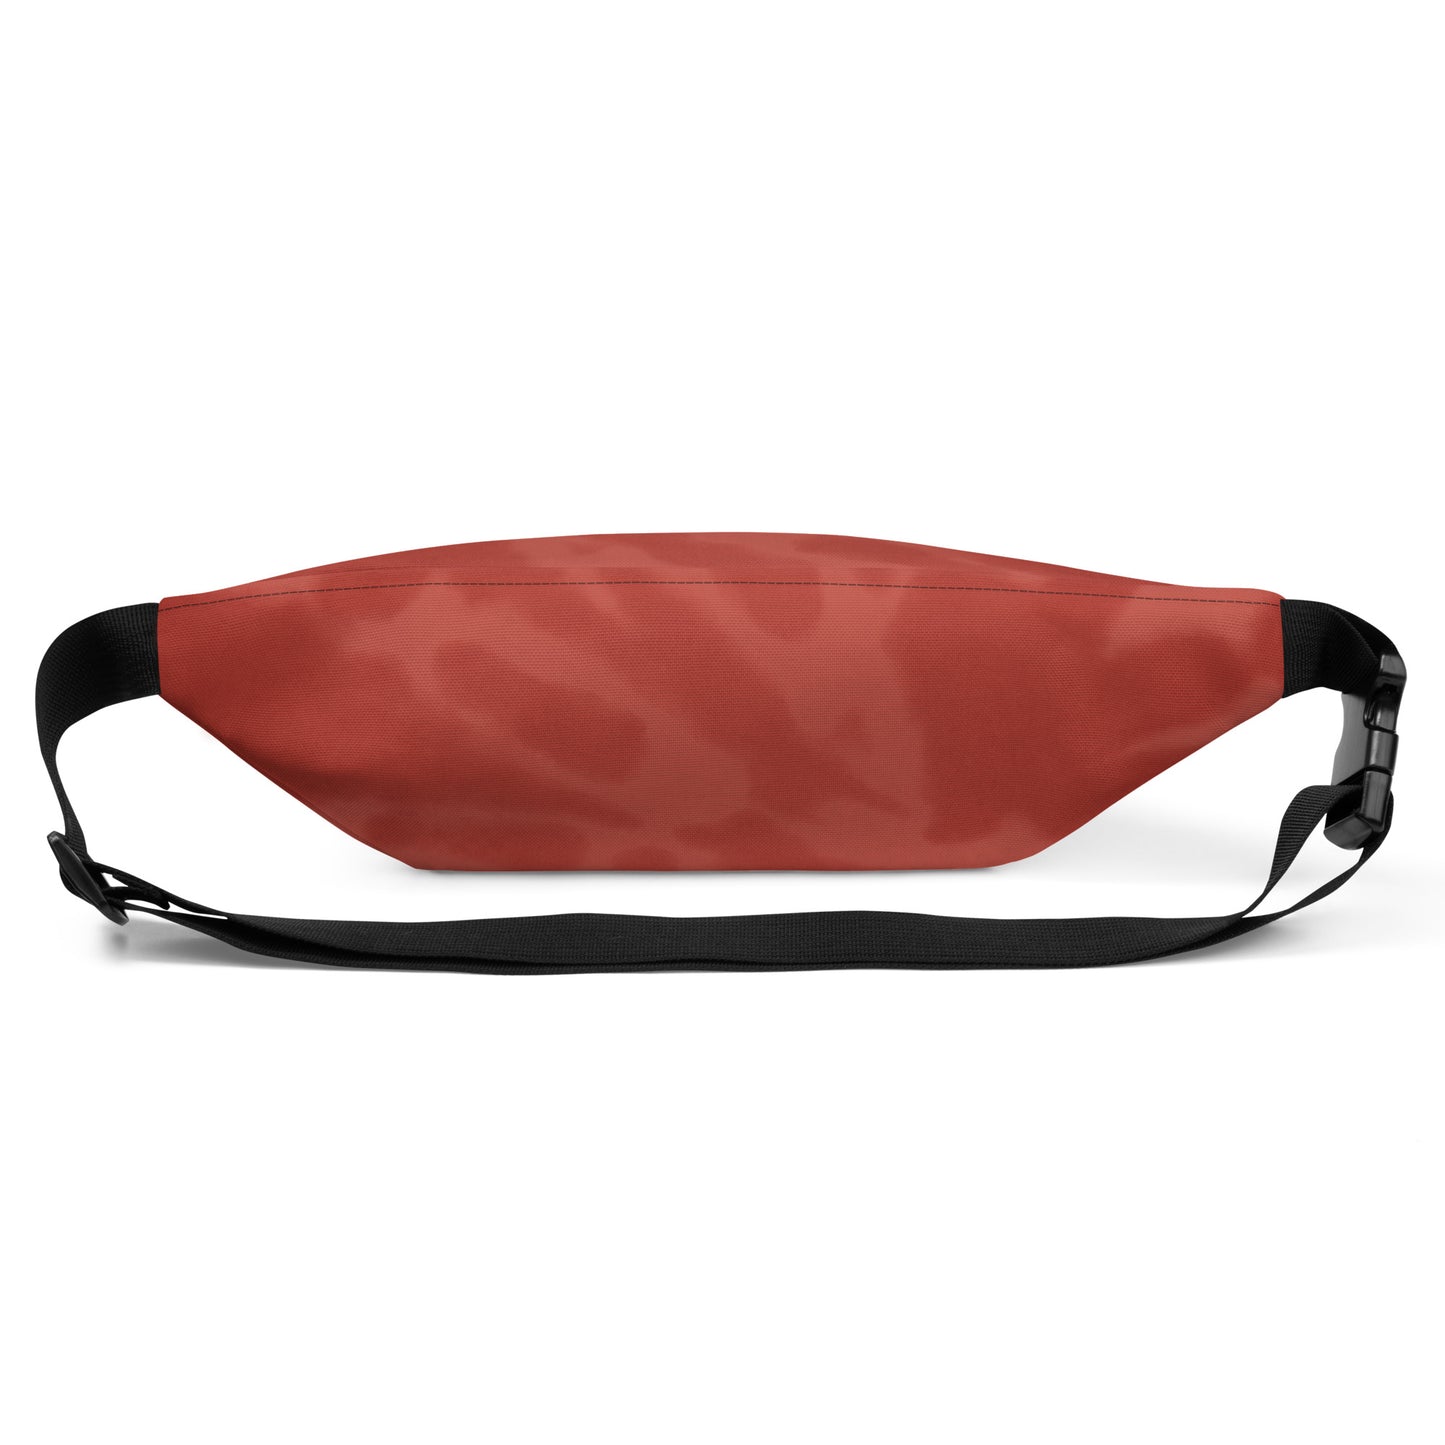 Travel Gift Fanny Pack - Red Tie-Dye • ICN Seoul • YHM Designs - Image 09